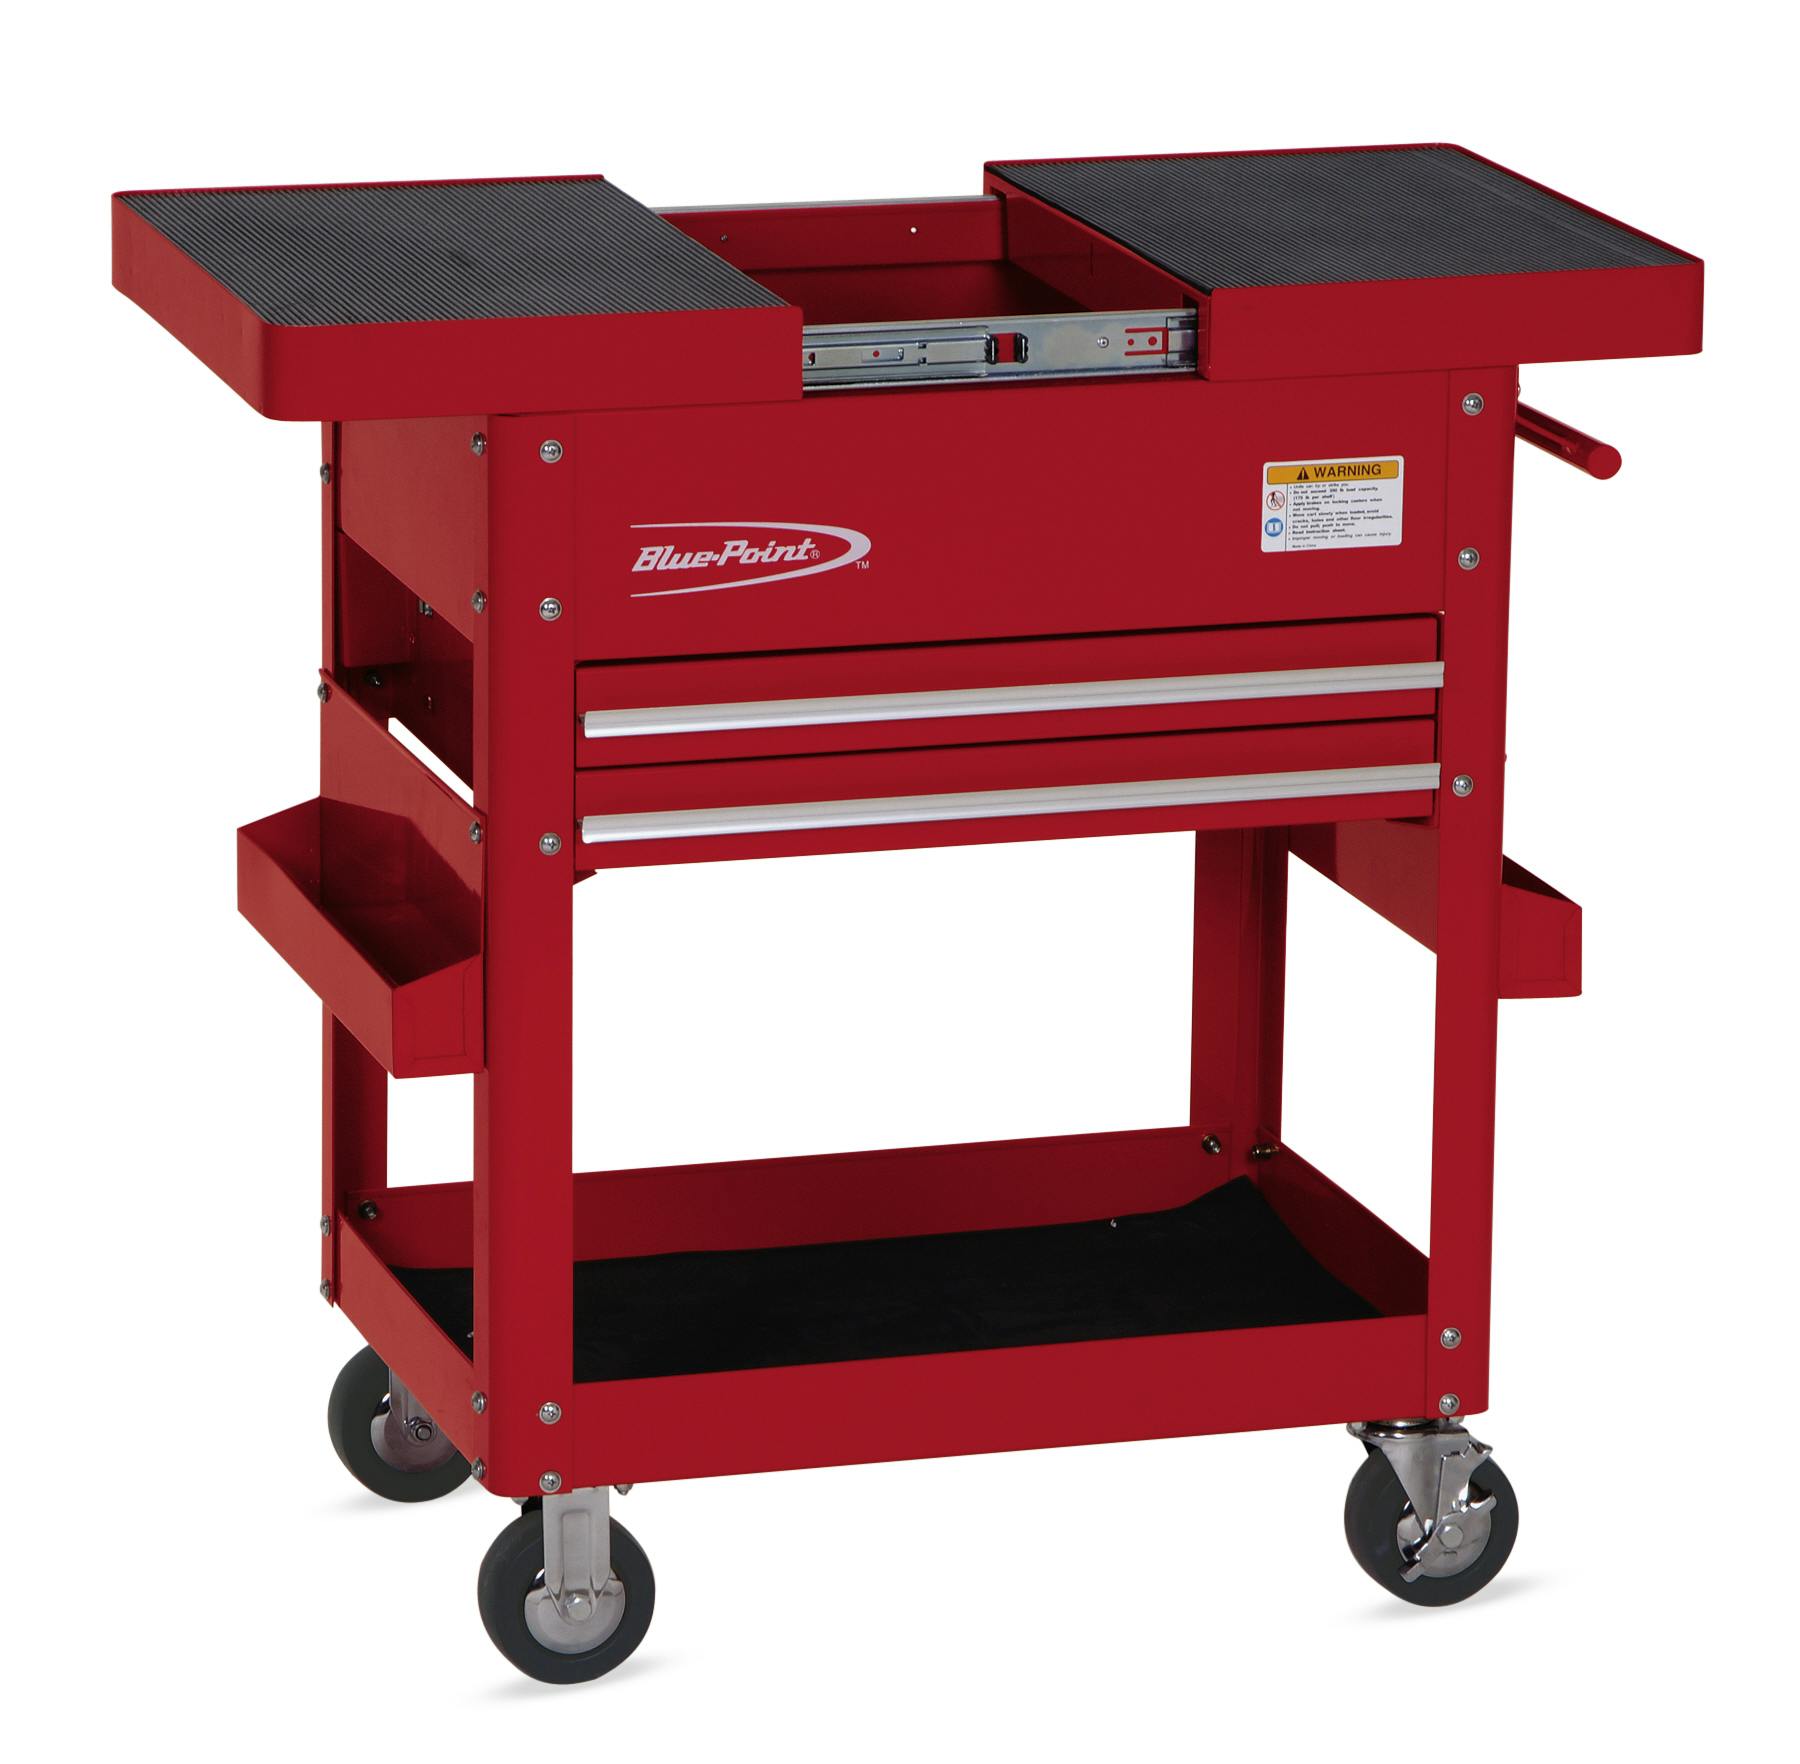 https://snap-on-products-hr.imgix.net/KRBCSST.jpg